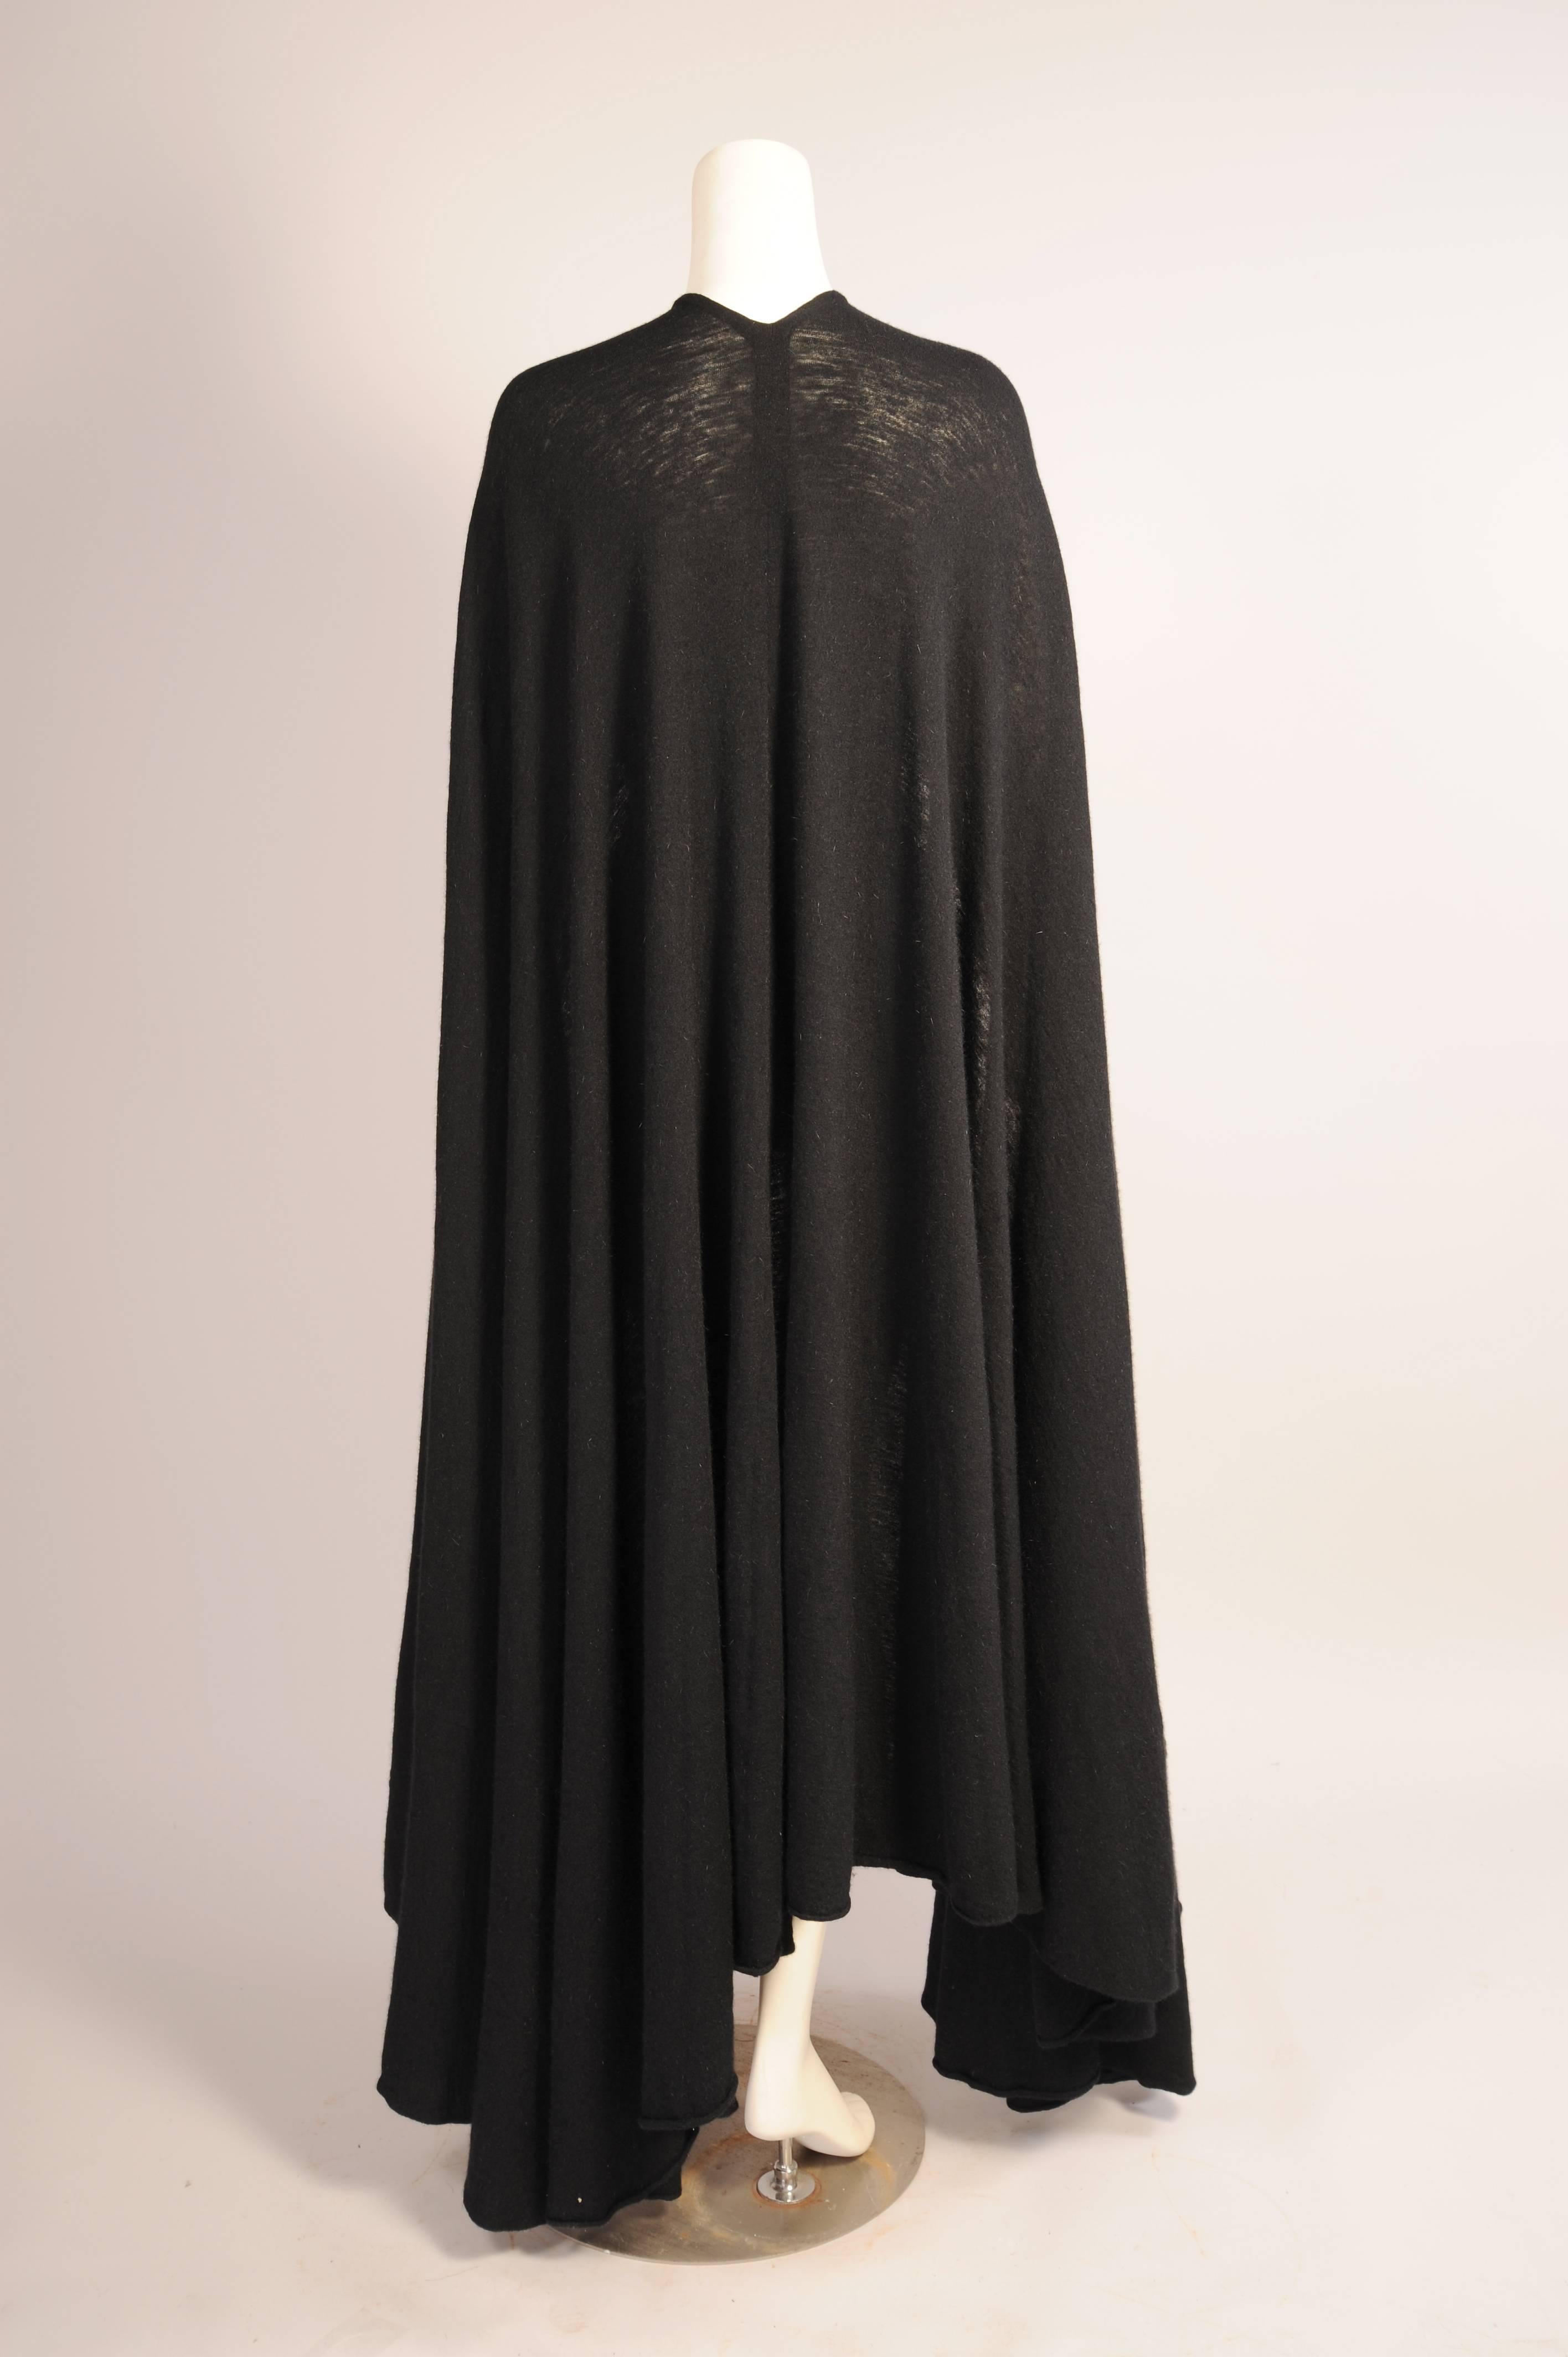 Madame Gres Haute Couture Black Angora and Wool Blend Evening Cape Book ...